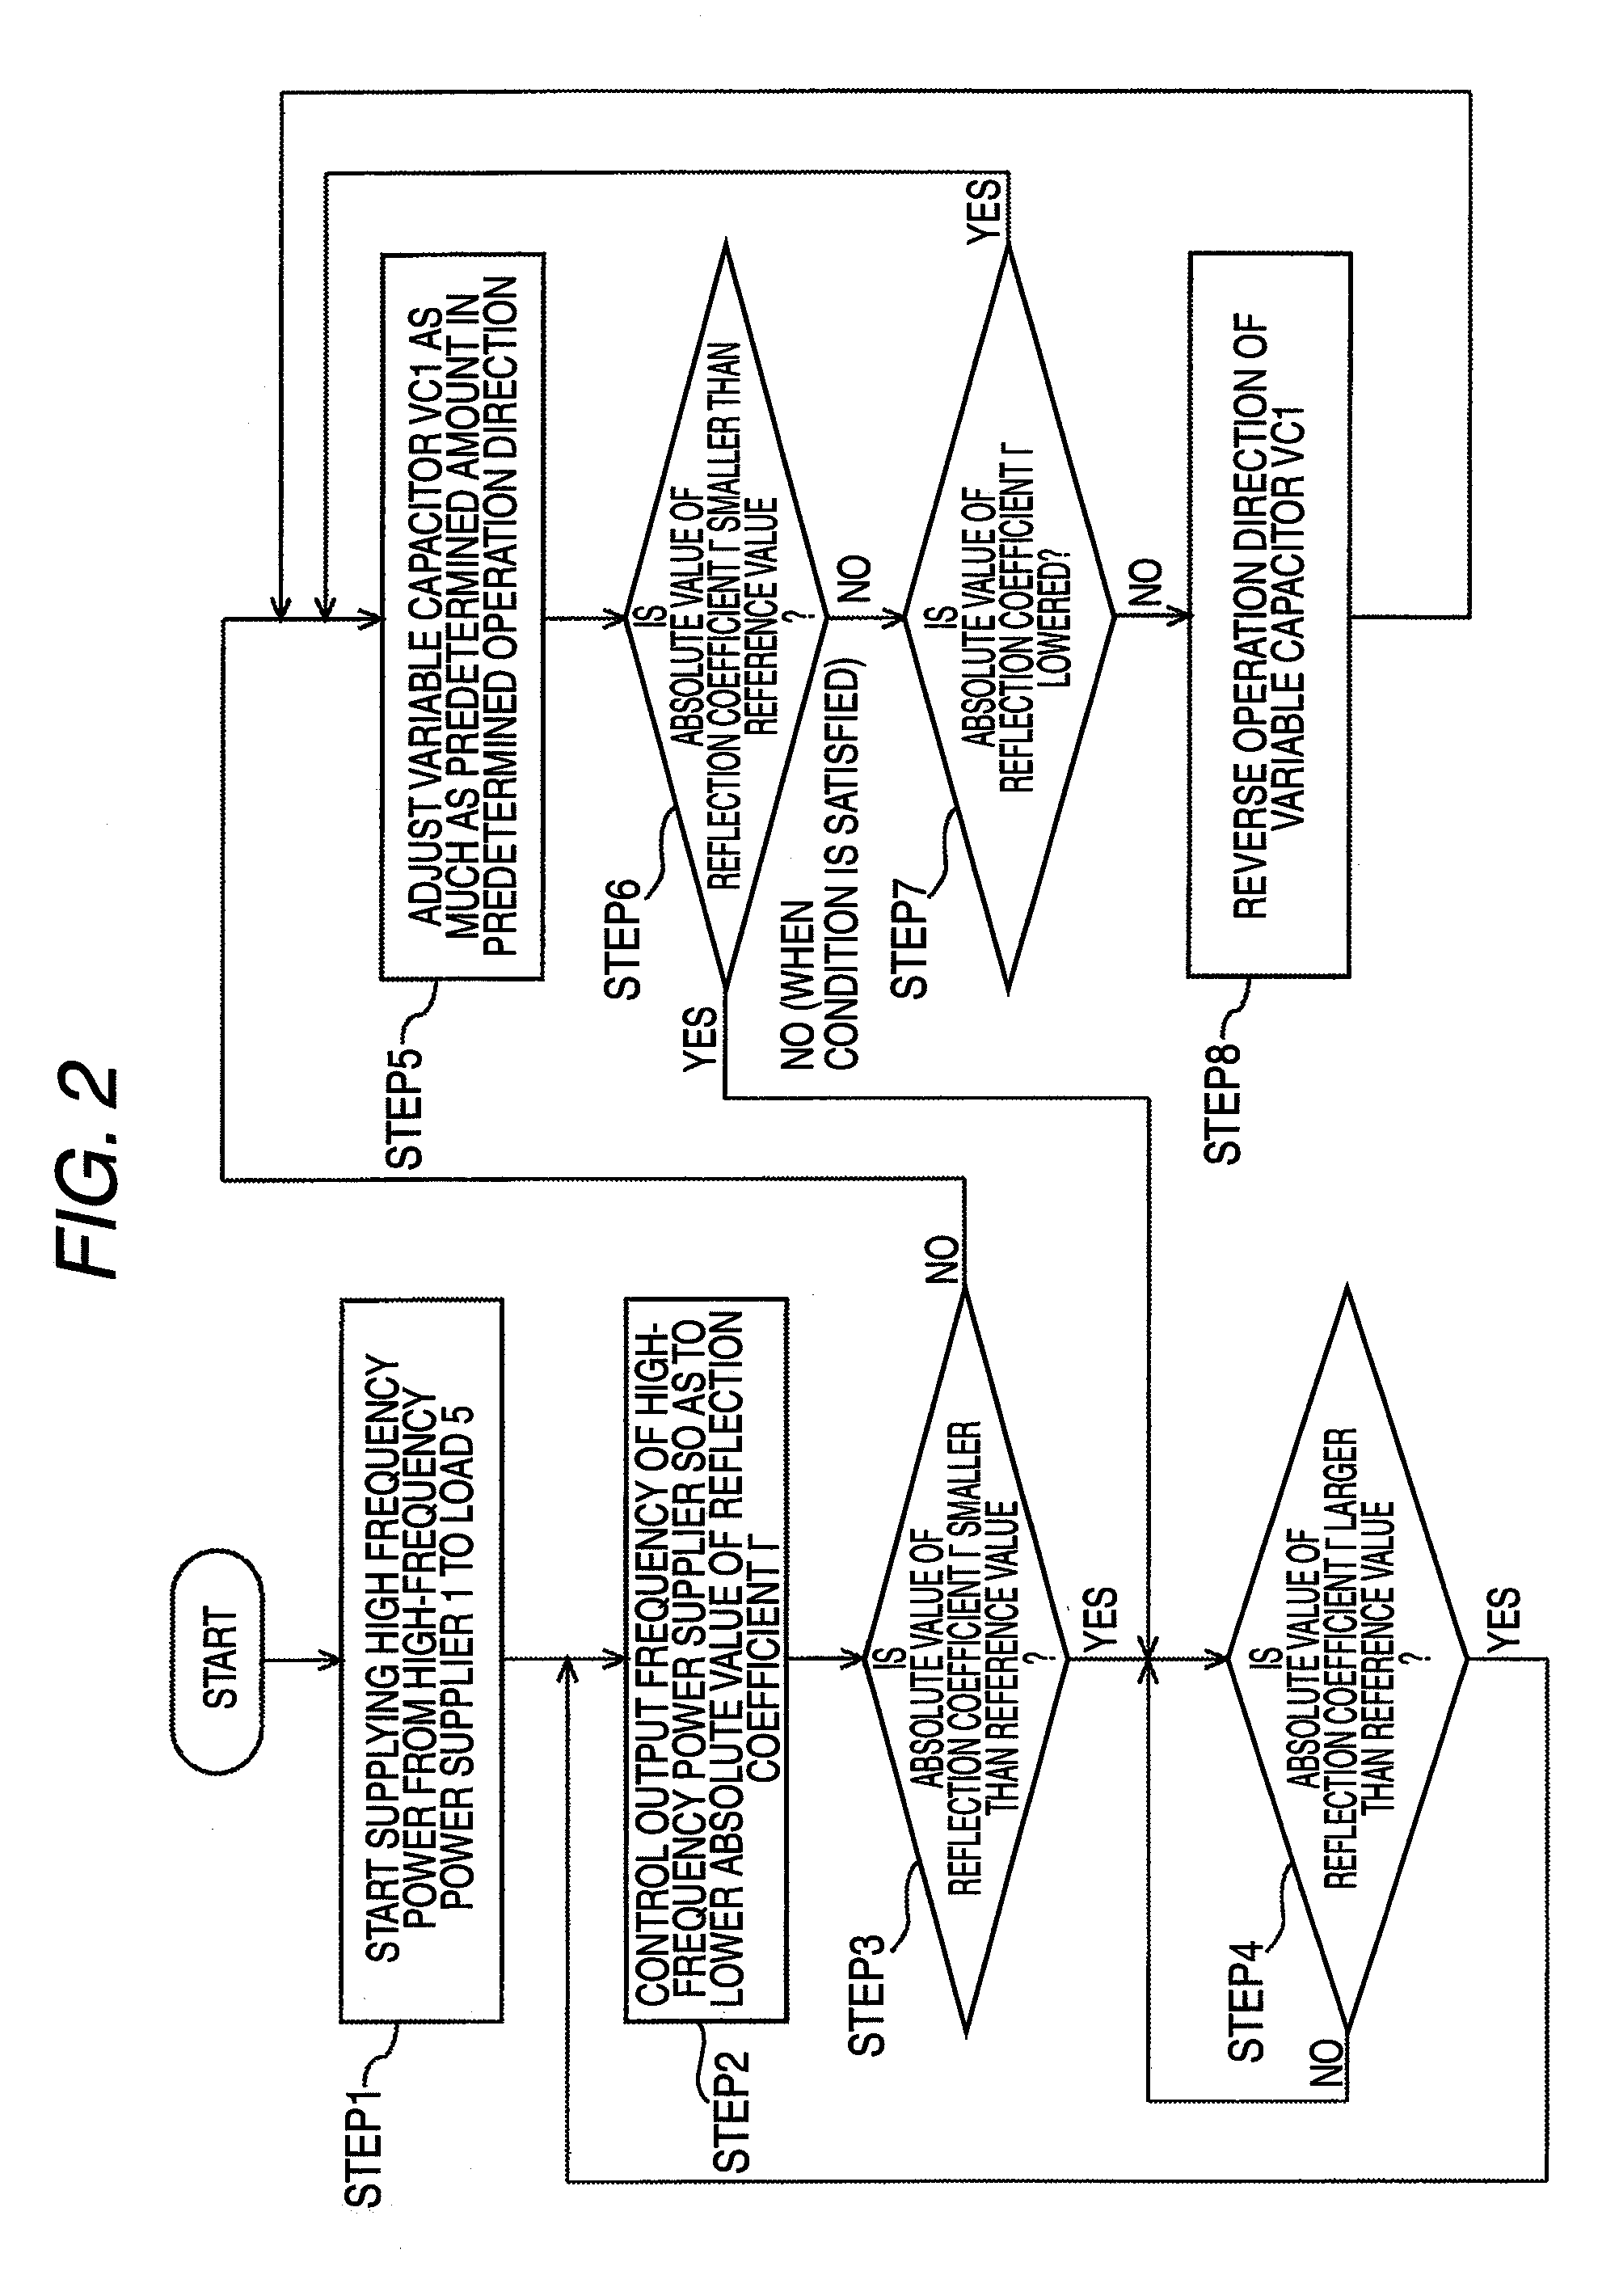 High frequency device with variable frequency and variable load impedance matching